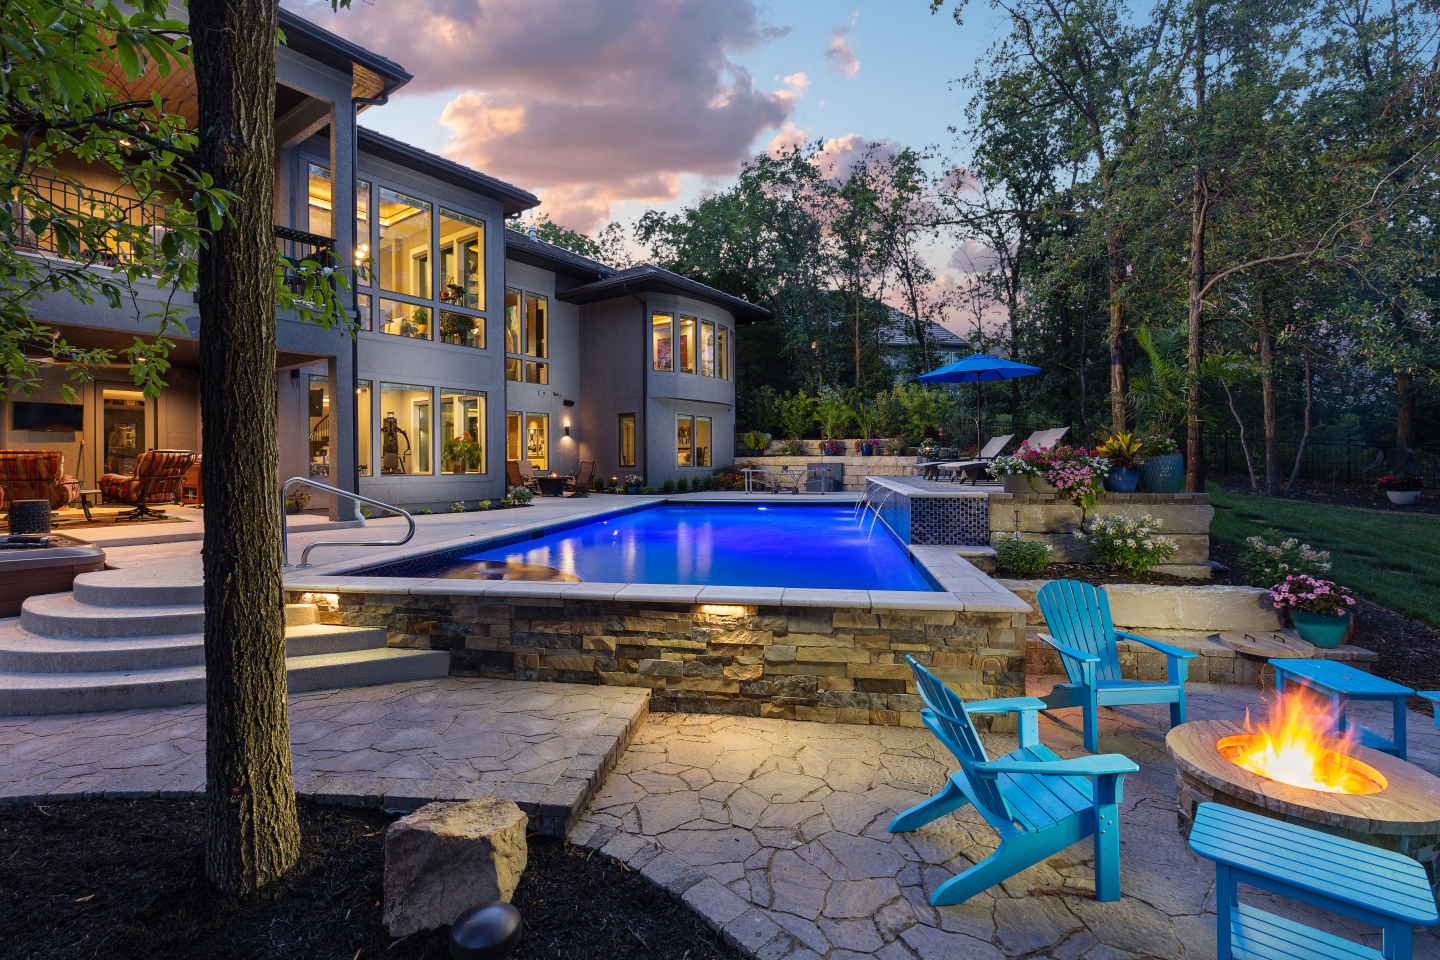 Evening at outdoor pool with firepit and waterfalls